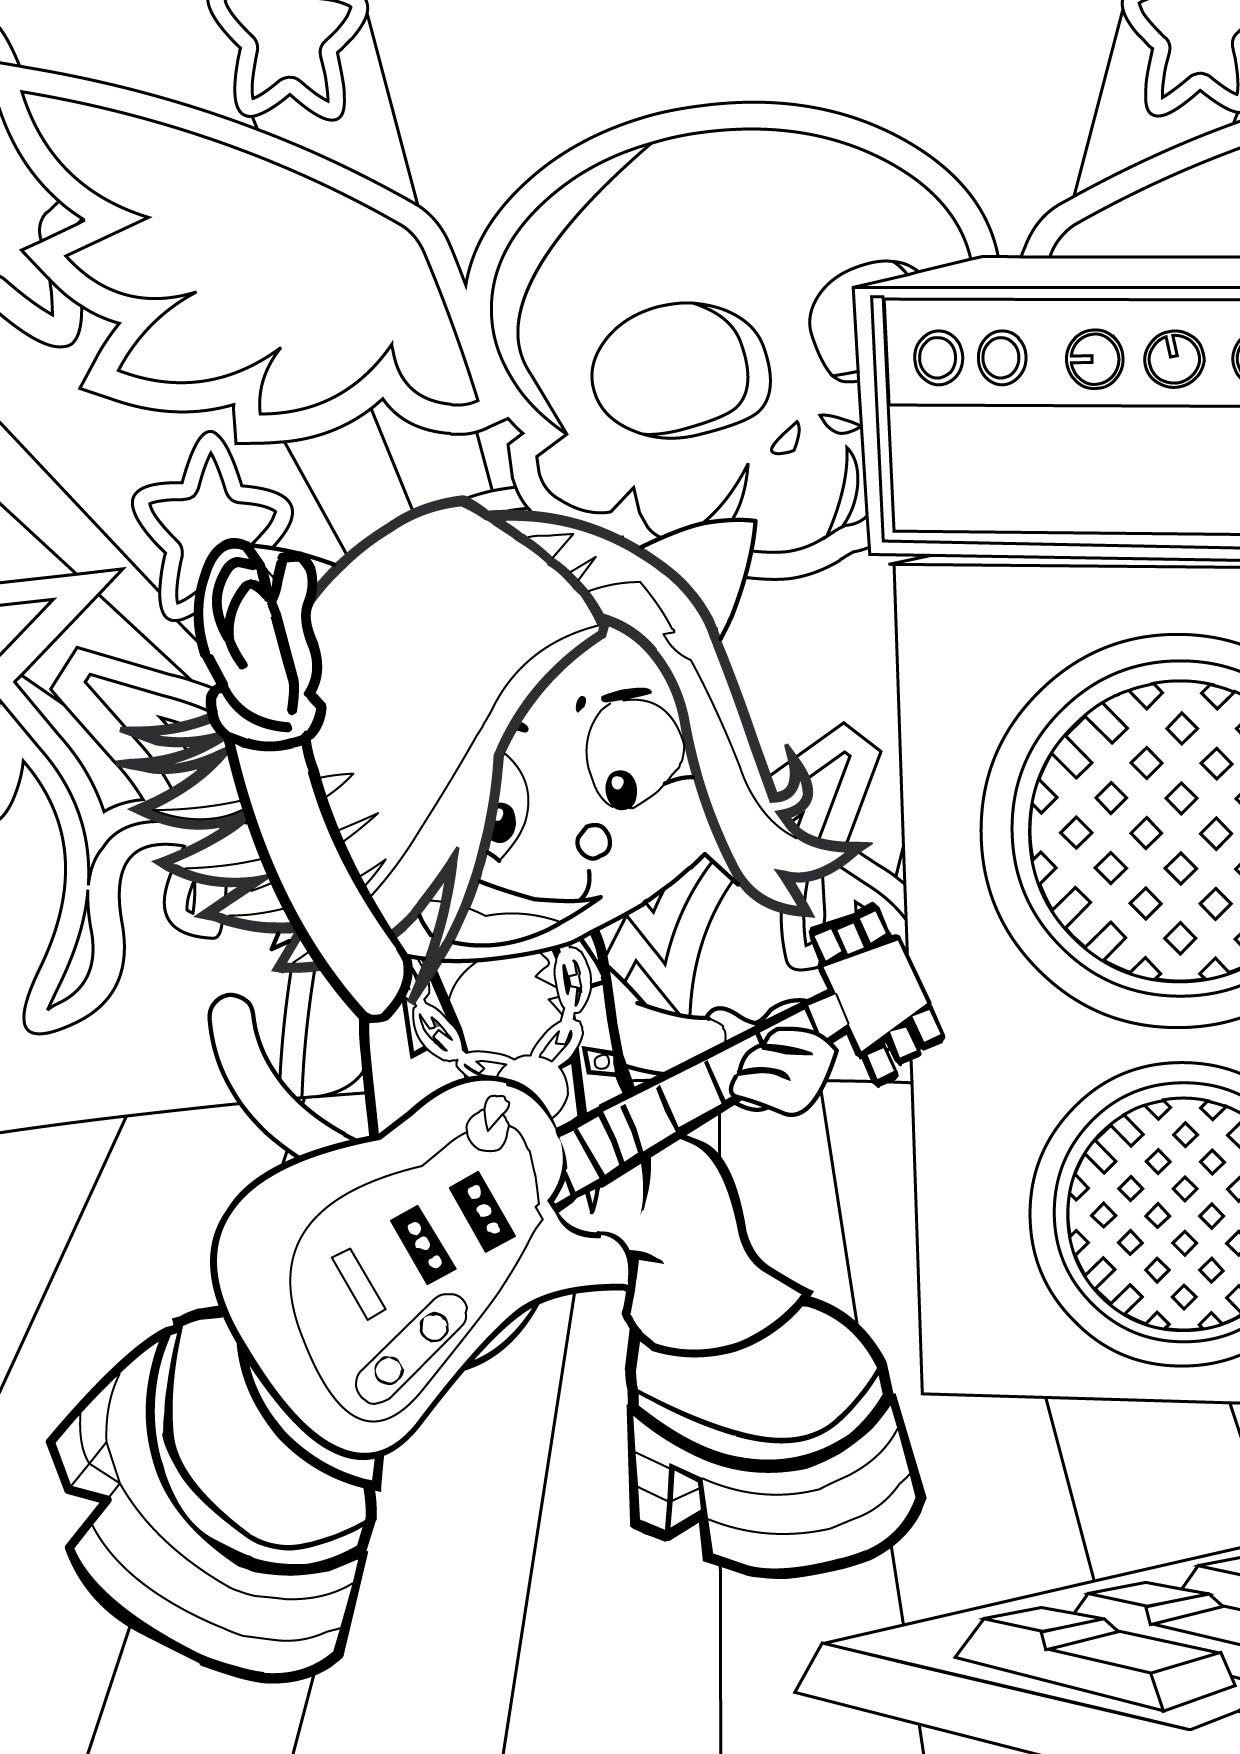 Rock Star Coloring Pages
 Best s of Rock Star Coloring Book Rock Band